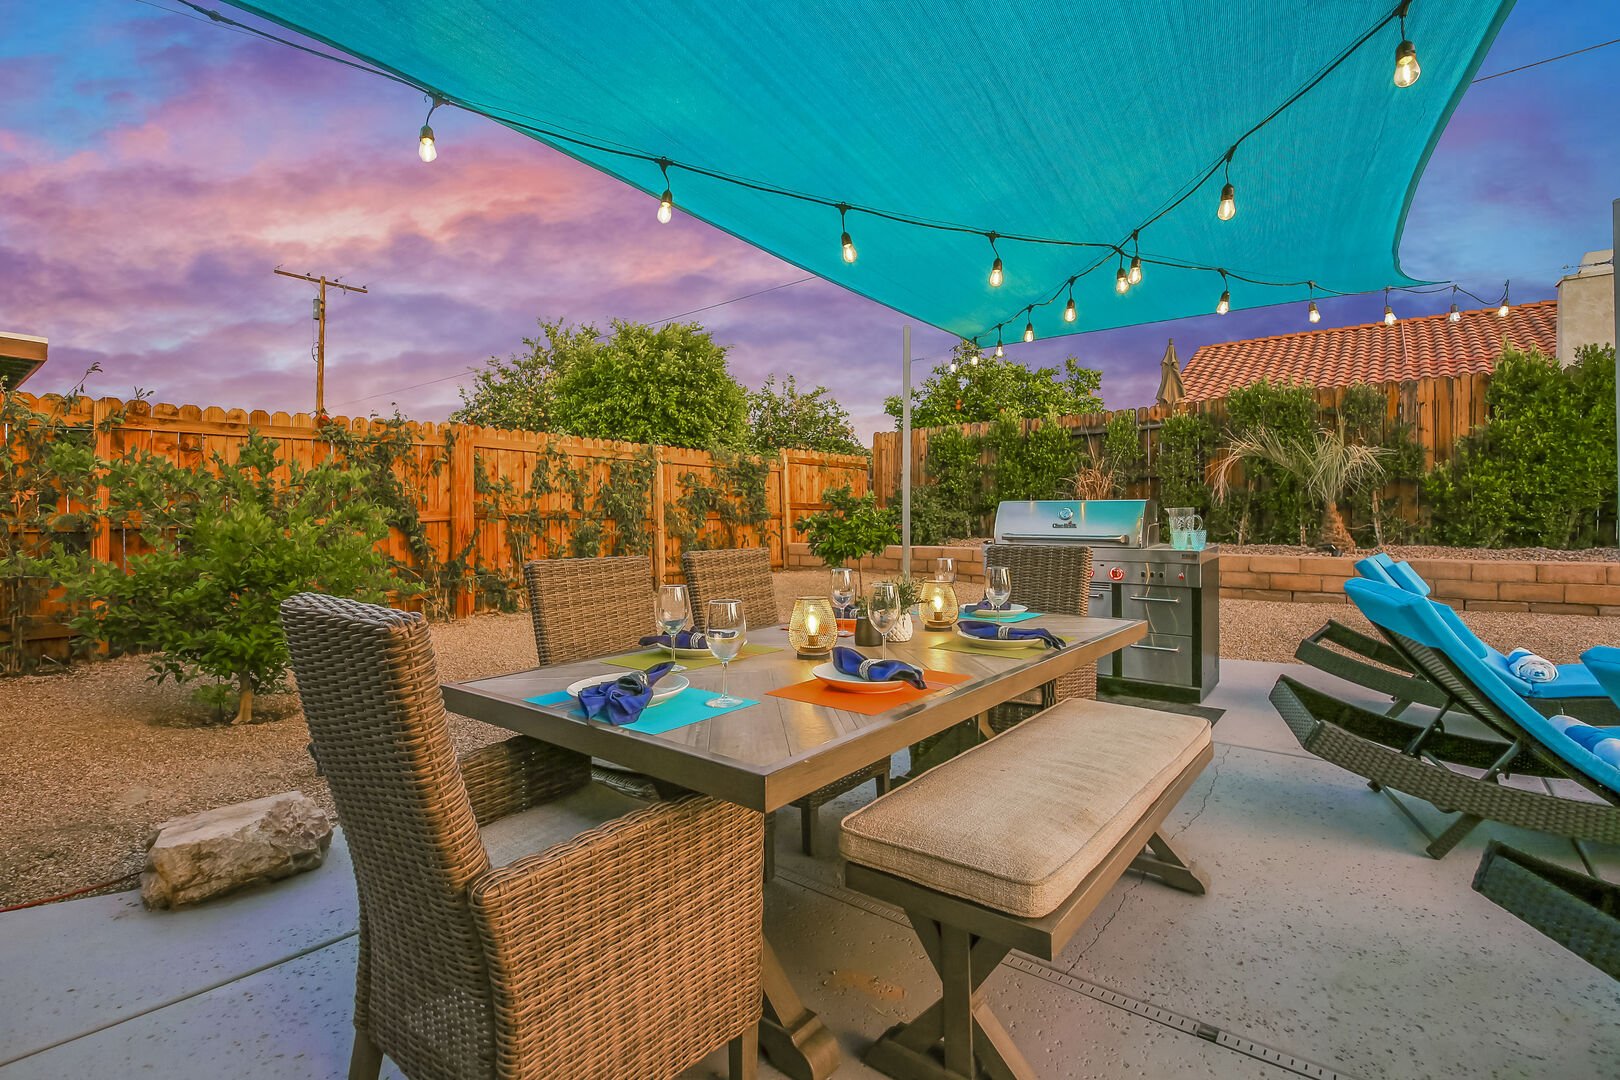 Enjoy your delicious dinner on the patio dining table with room for six.